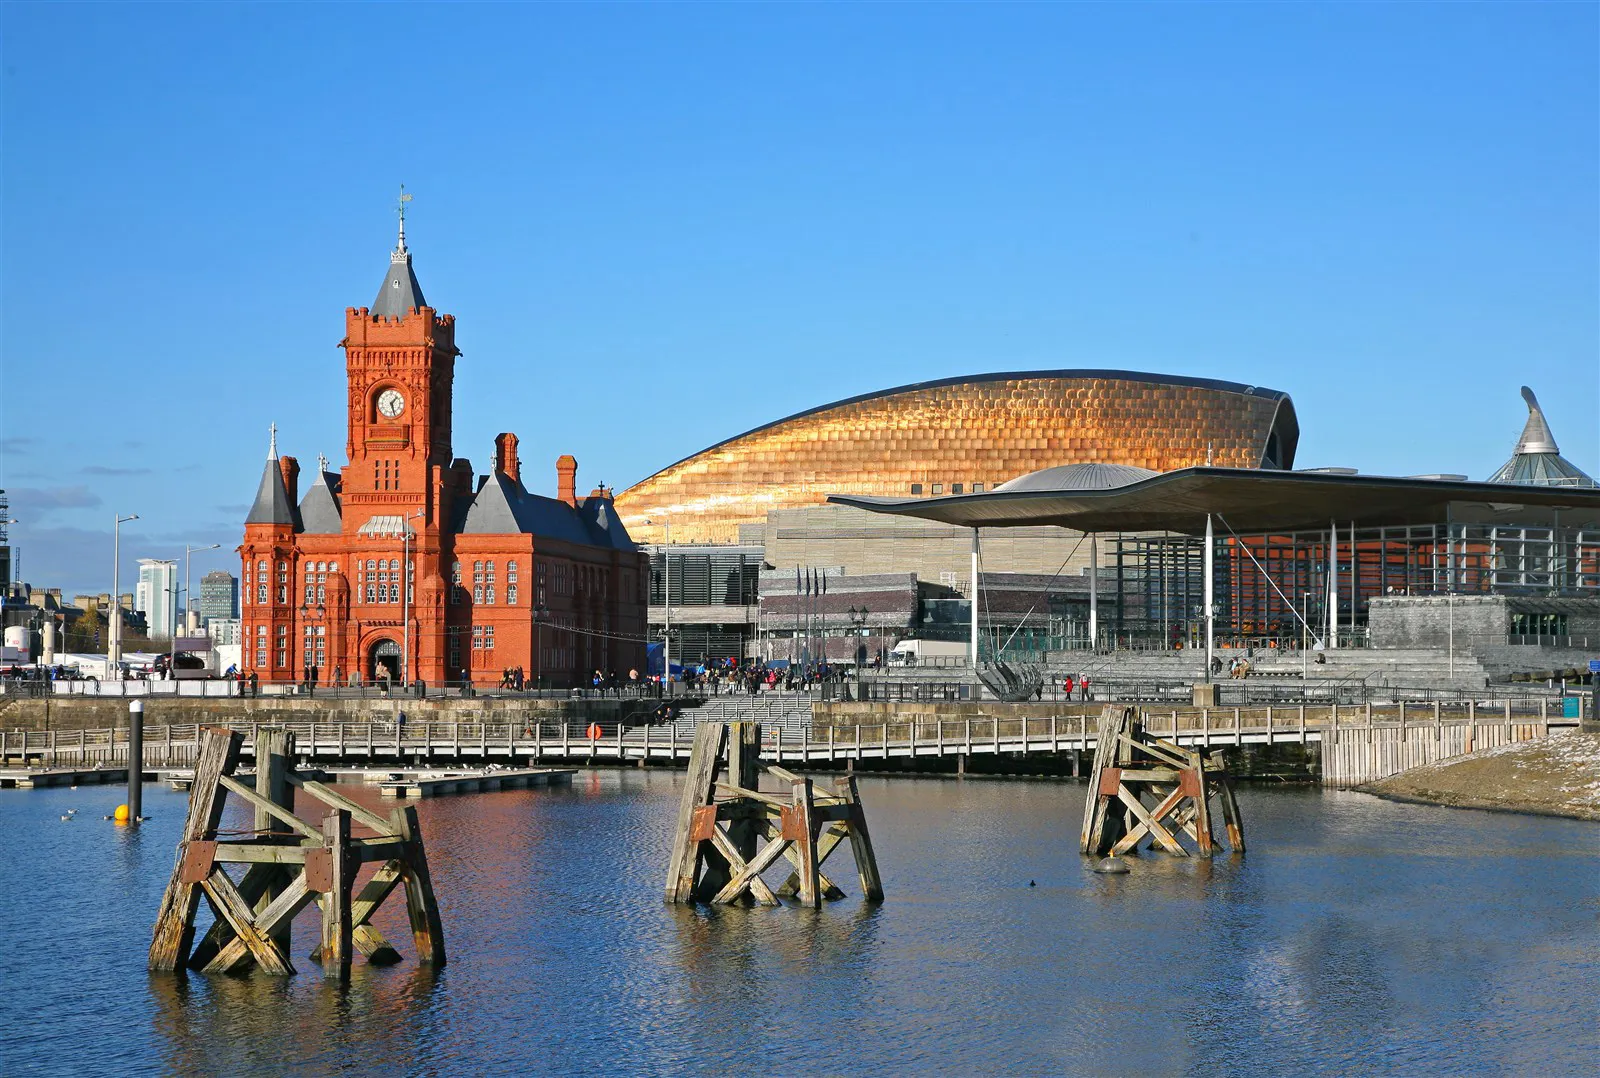 Cardiff bay, a popular Dr Who filming location